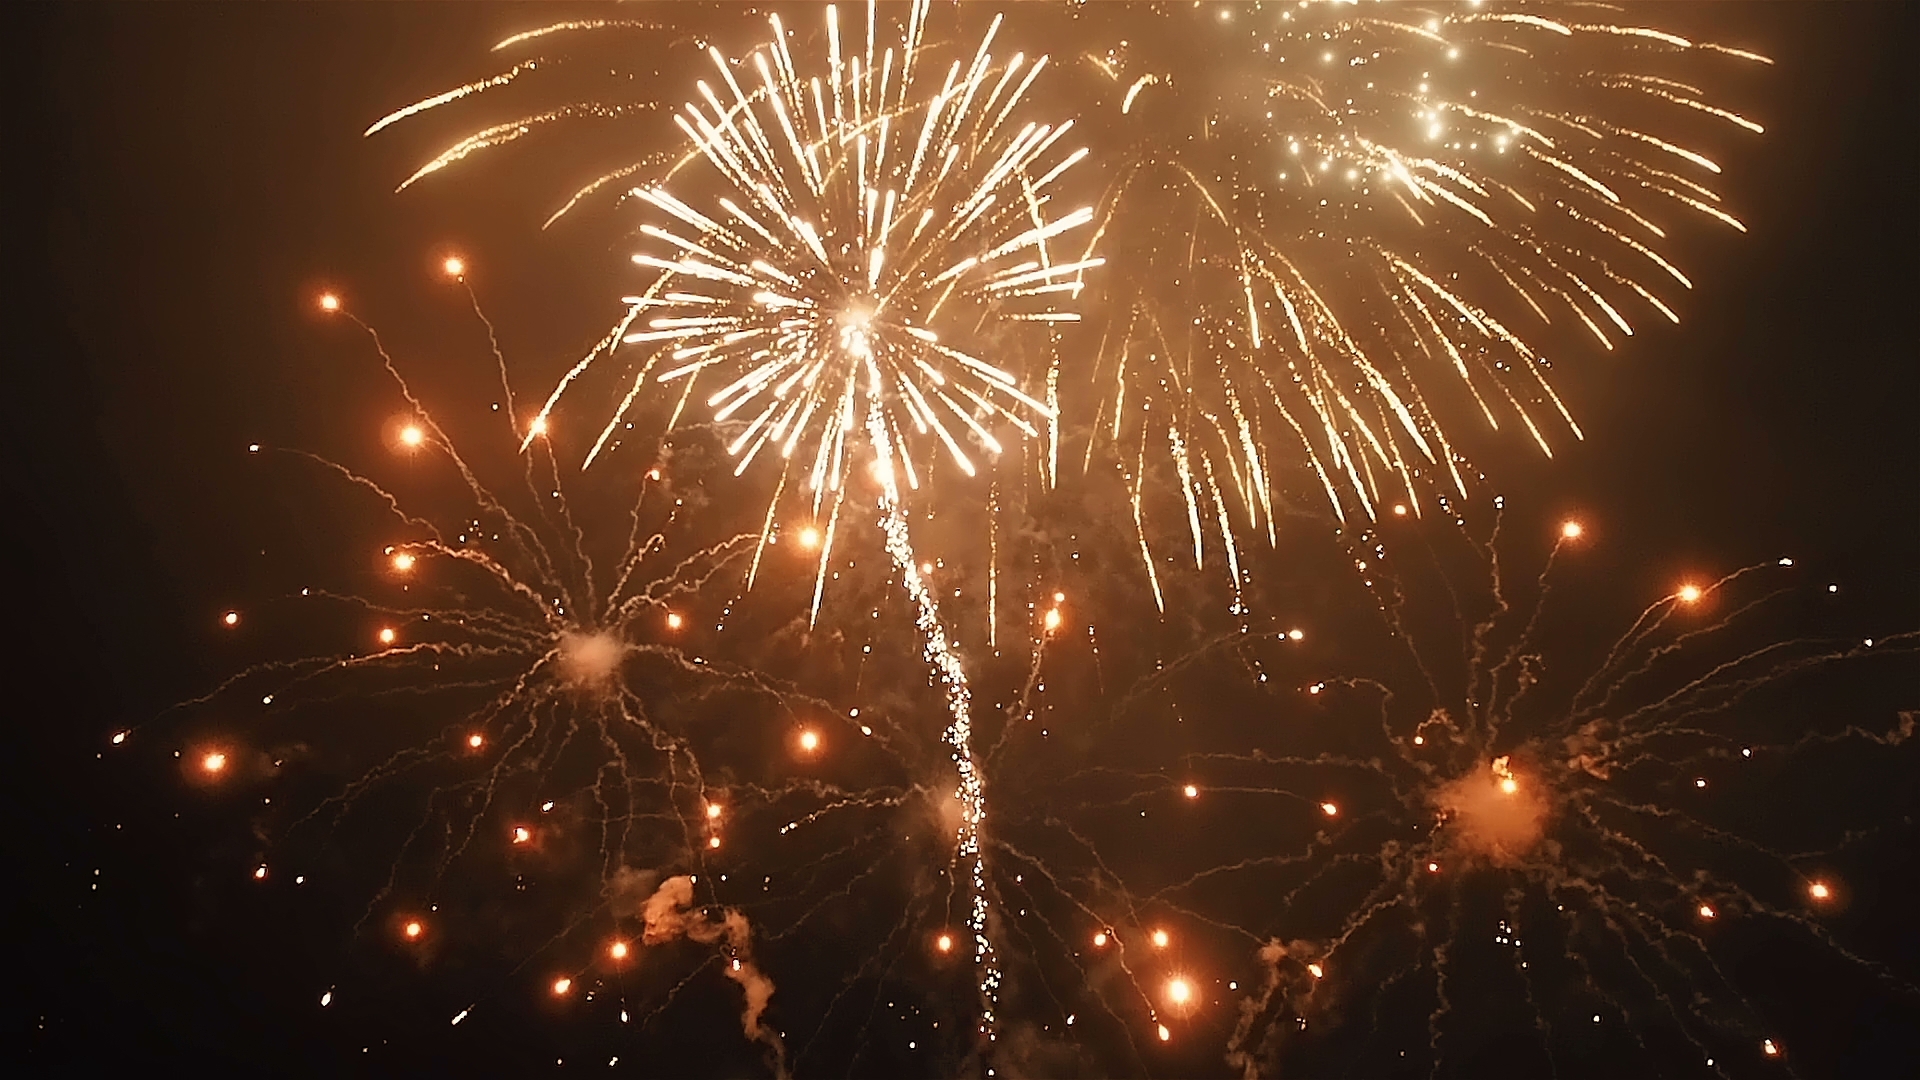 See where you can find a fireworks display near you.